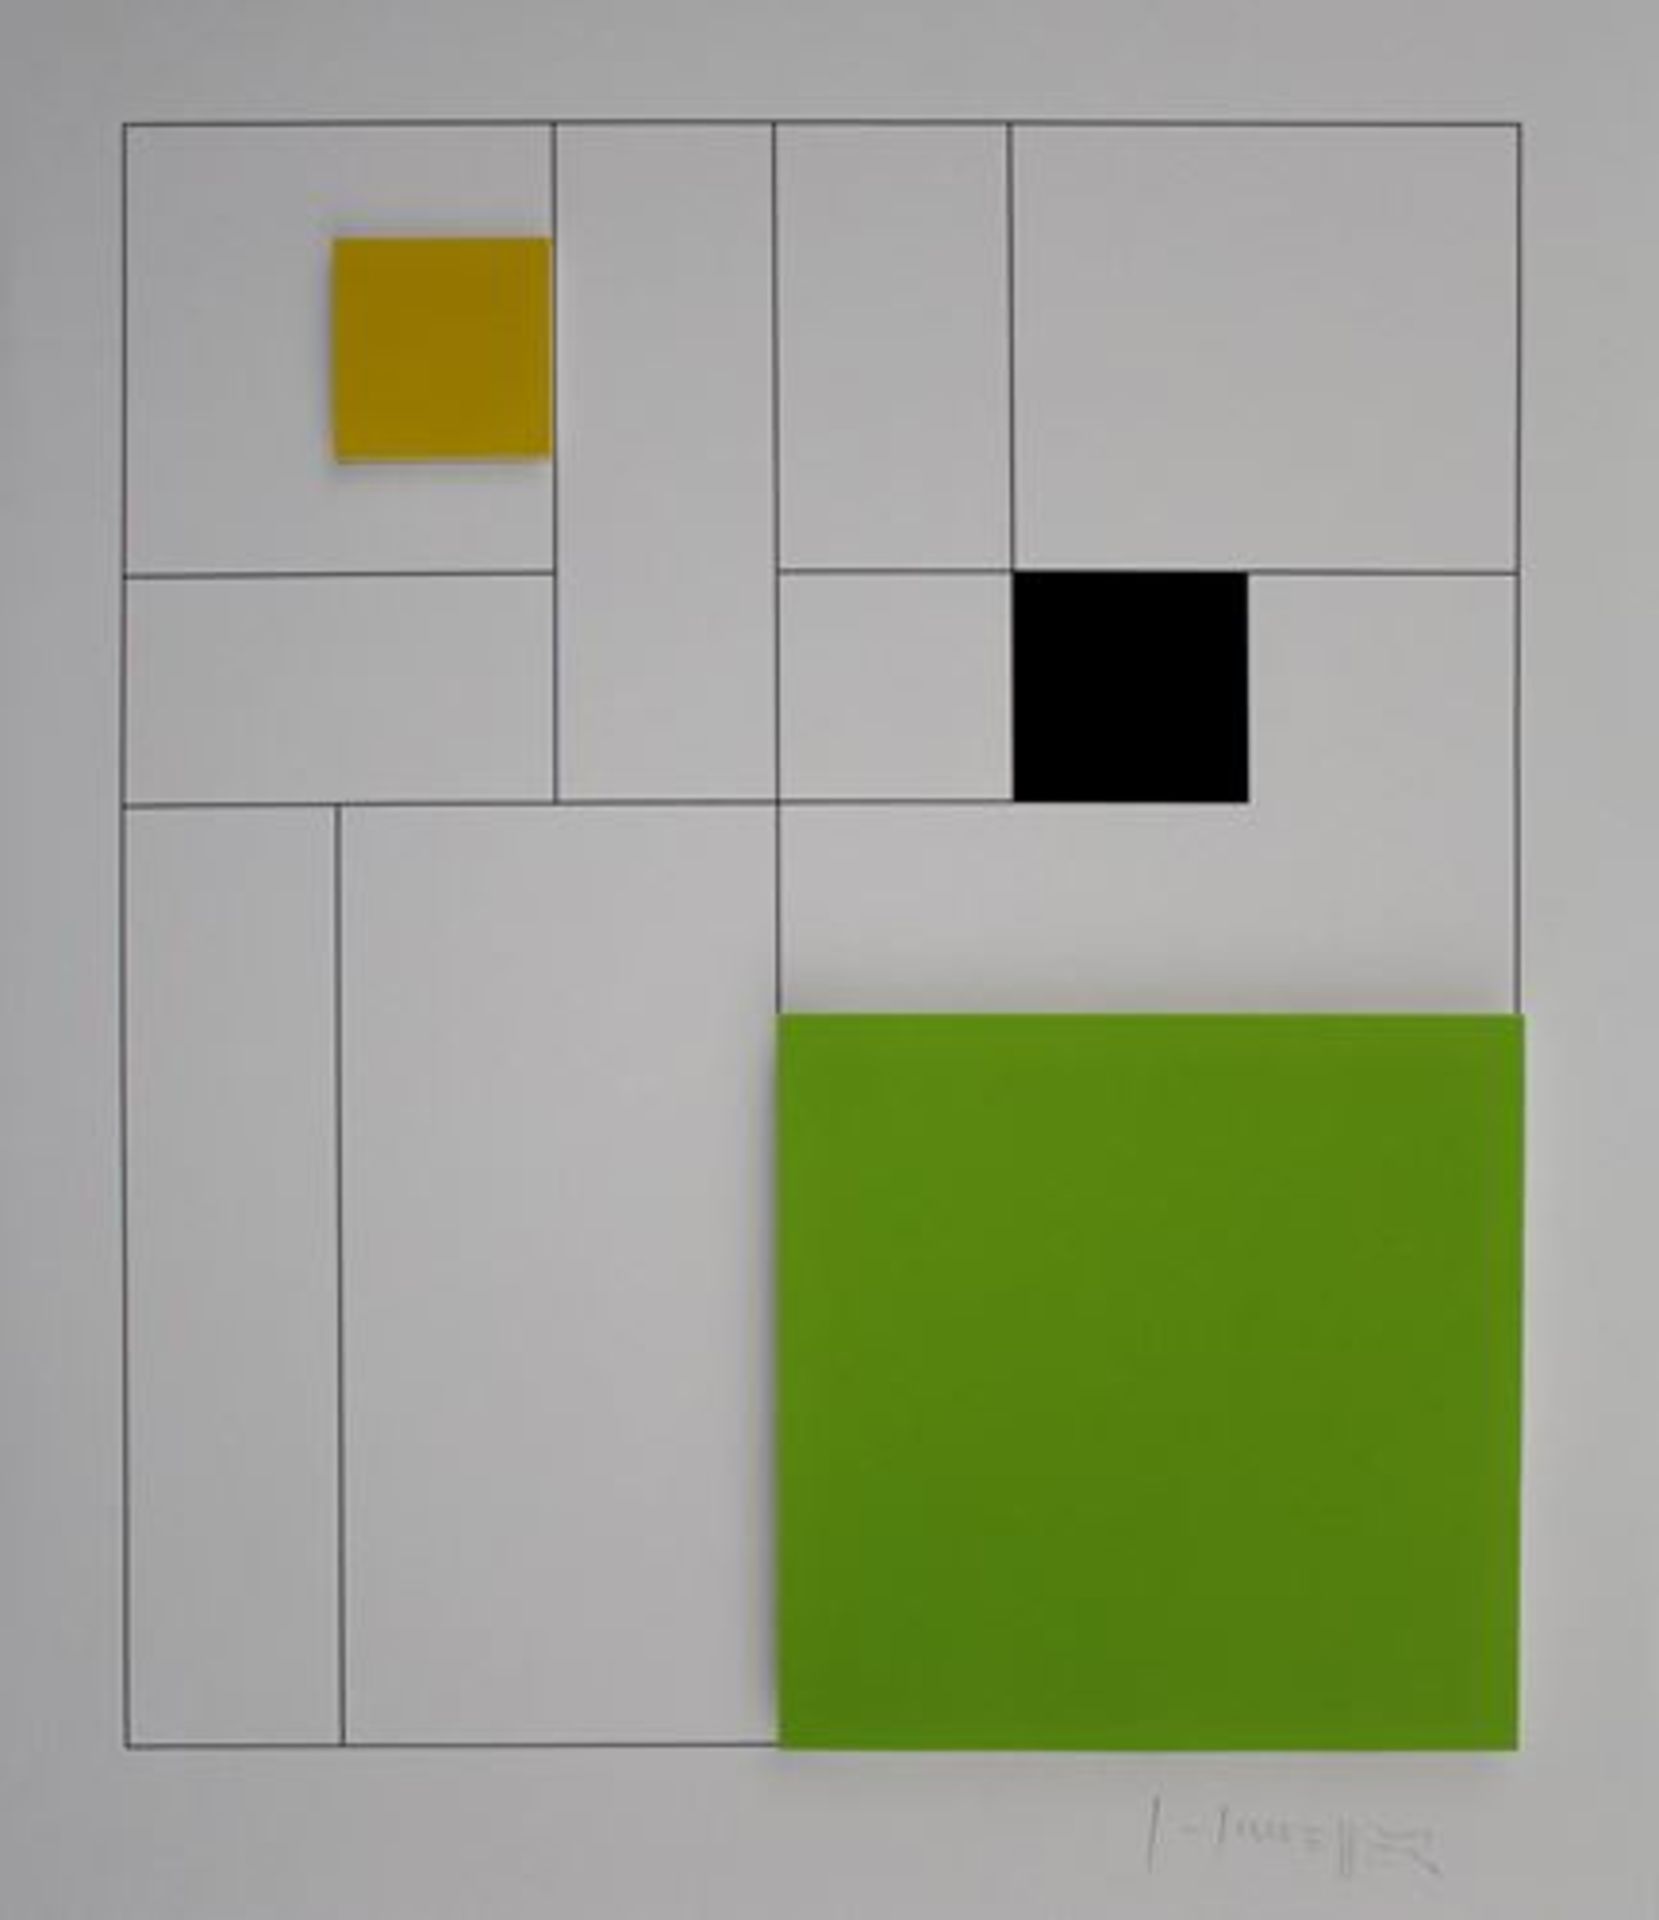 Gottfried Honegger (1917 - 2016) "Composition 3 squares" 3D serigraphy, justified [...]